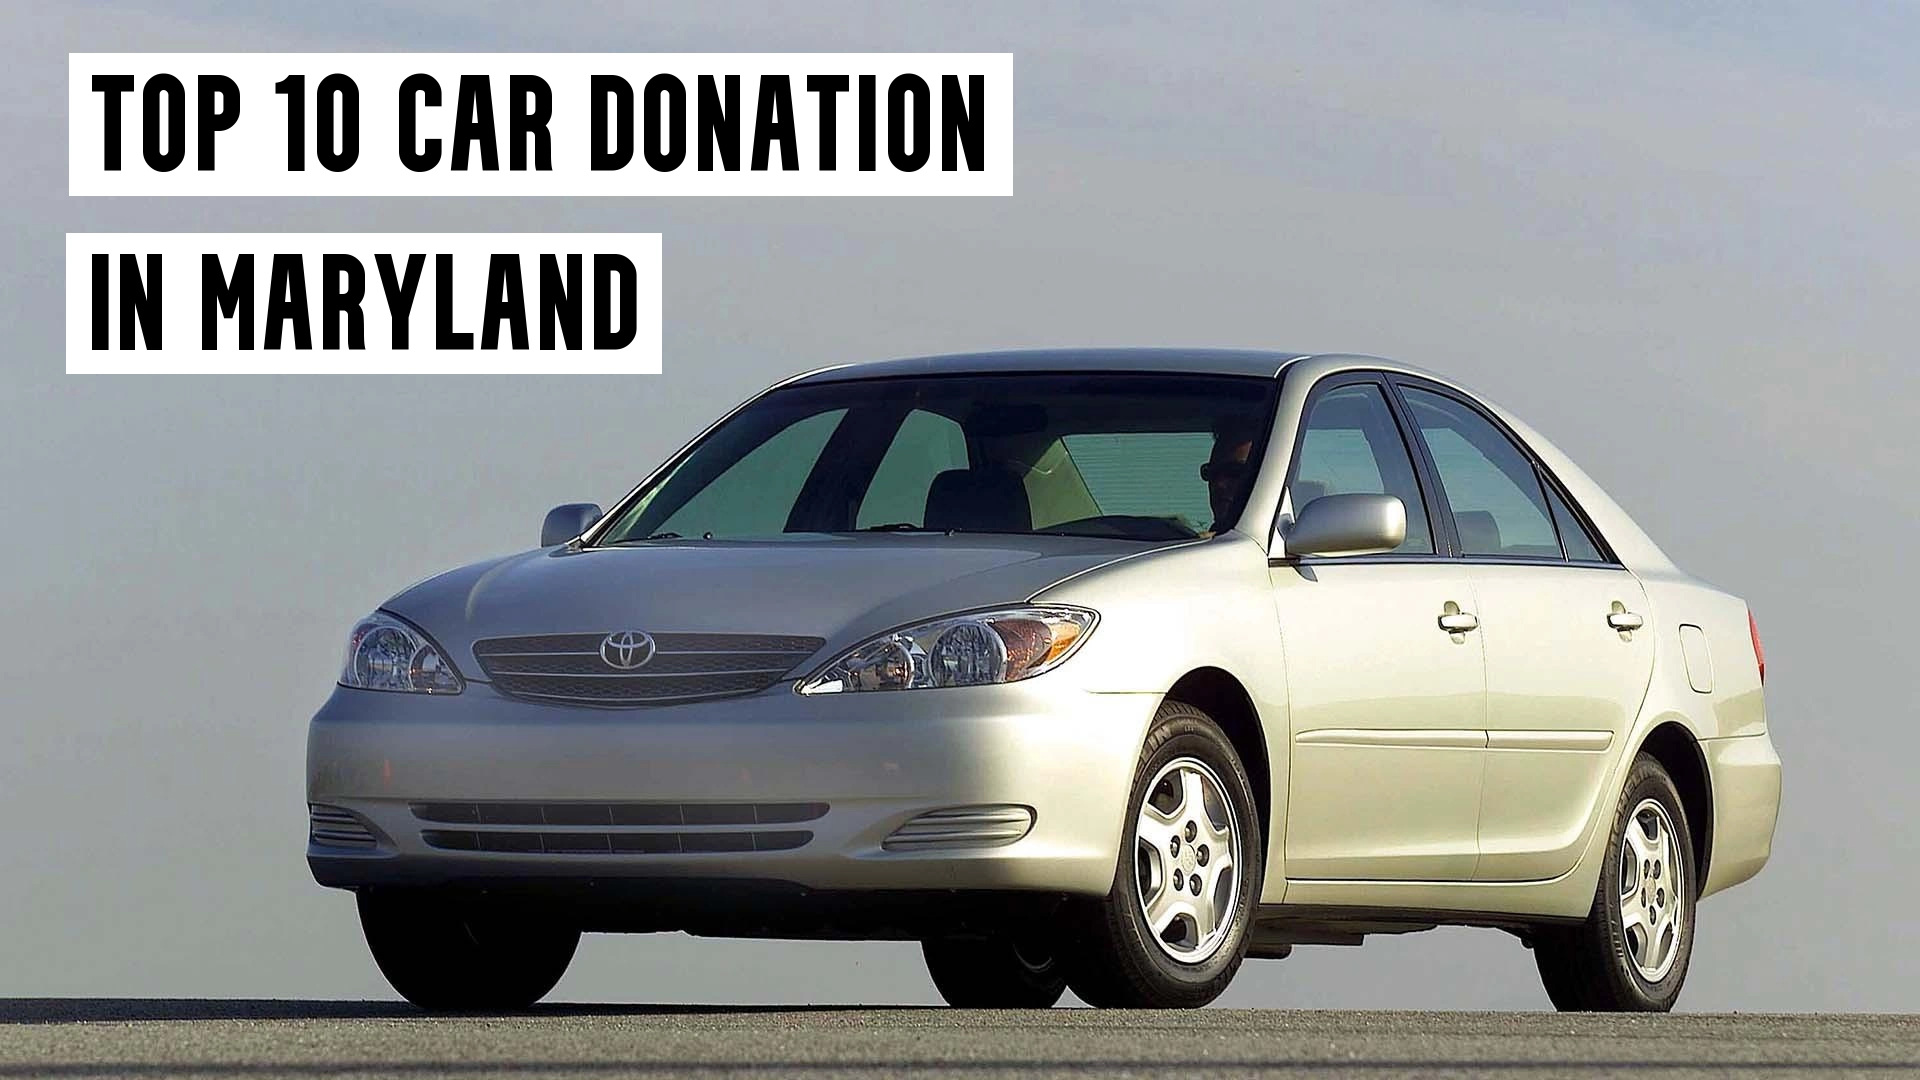 Car Donation in Maryland